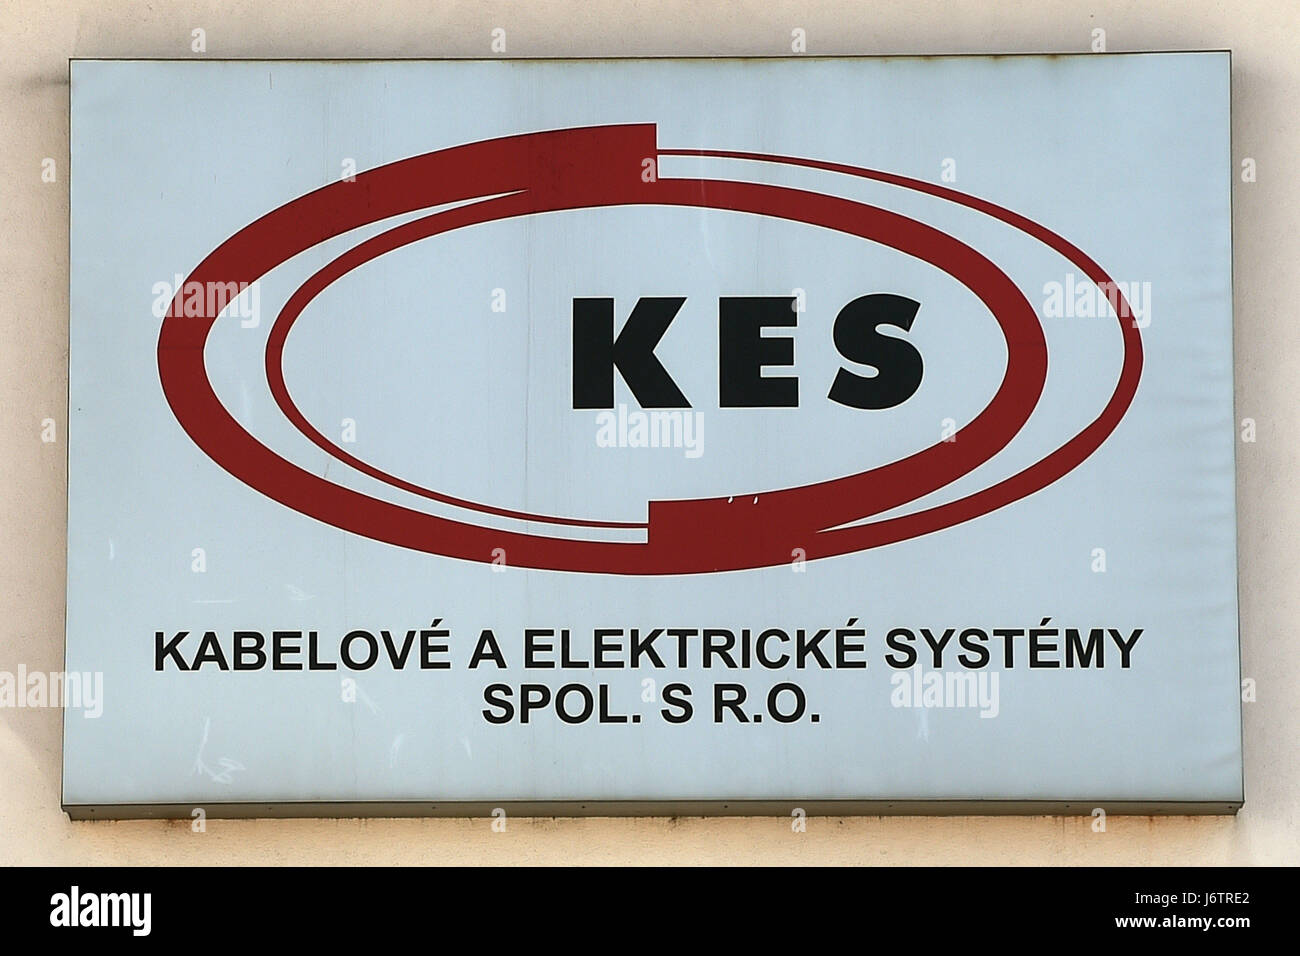 Production of company KES a producer of wiring harnesses for car lights in Vratimov, Czech Republic, May 19, 2017. KES supplies about a half of its output to the parent company, Austria's ZKW. The other half is supplied to large customers, such as Hella and Varroc. KES produces about 40 million wiring harnesses annually. KES is celebrating its 25th anniversary on the Czech market this year. The company produces wiring harnesses for the Porsche, Audi, Opel, BMW, Ferrari and Volvo makes as well as tractors. (CTK Photo/Jaroslav Ozana) Stock Photo